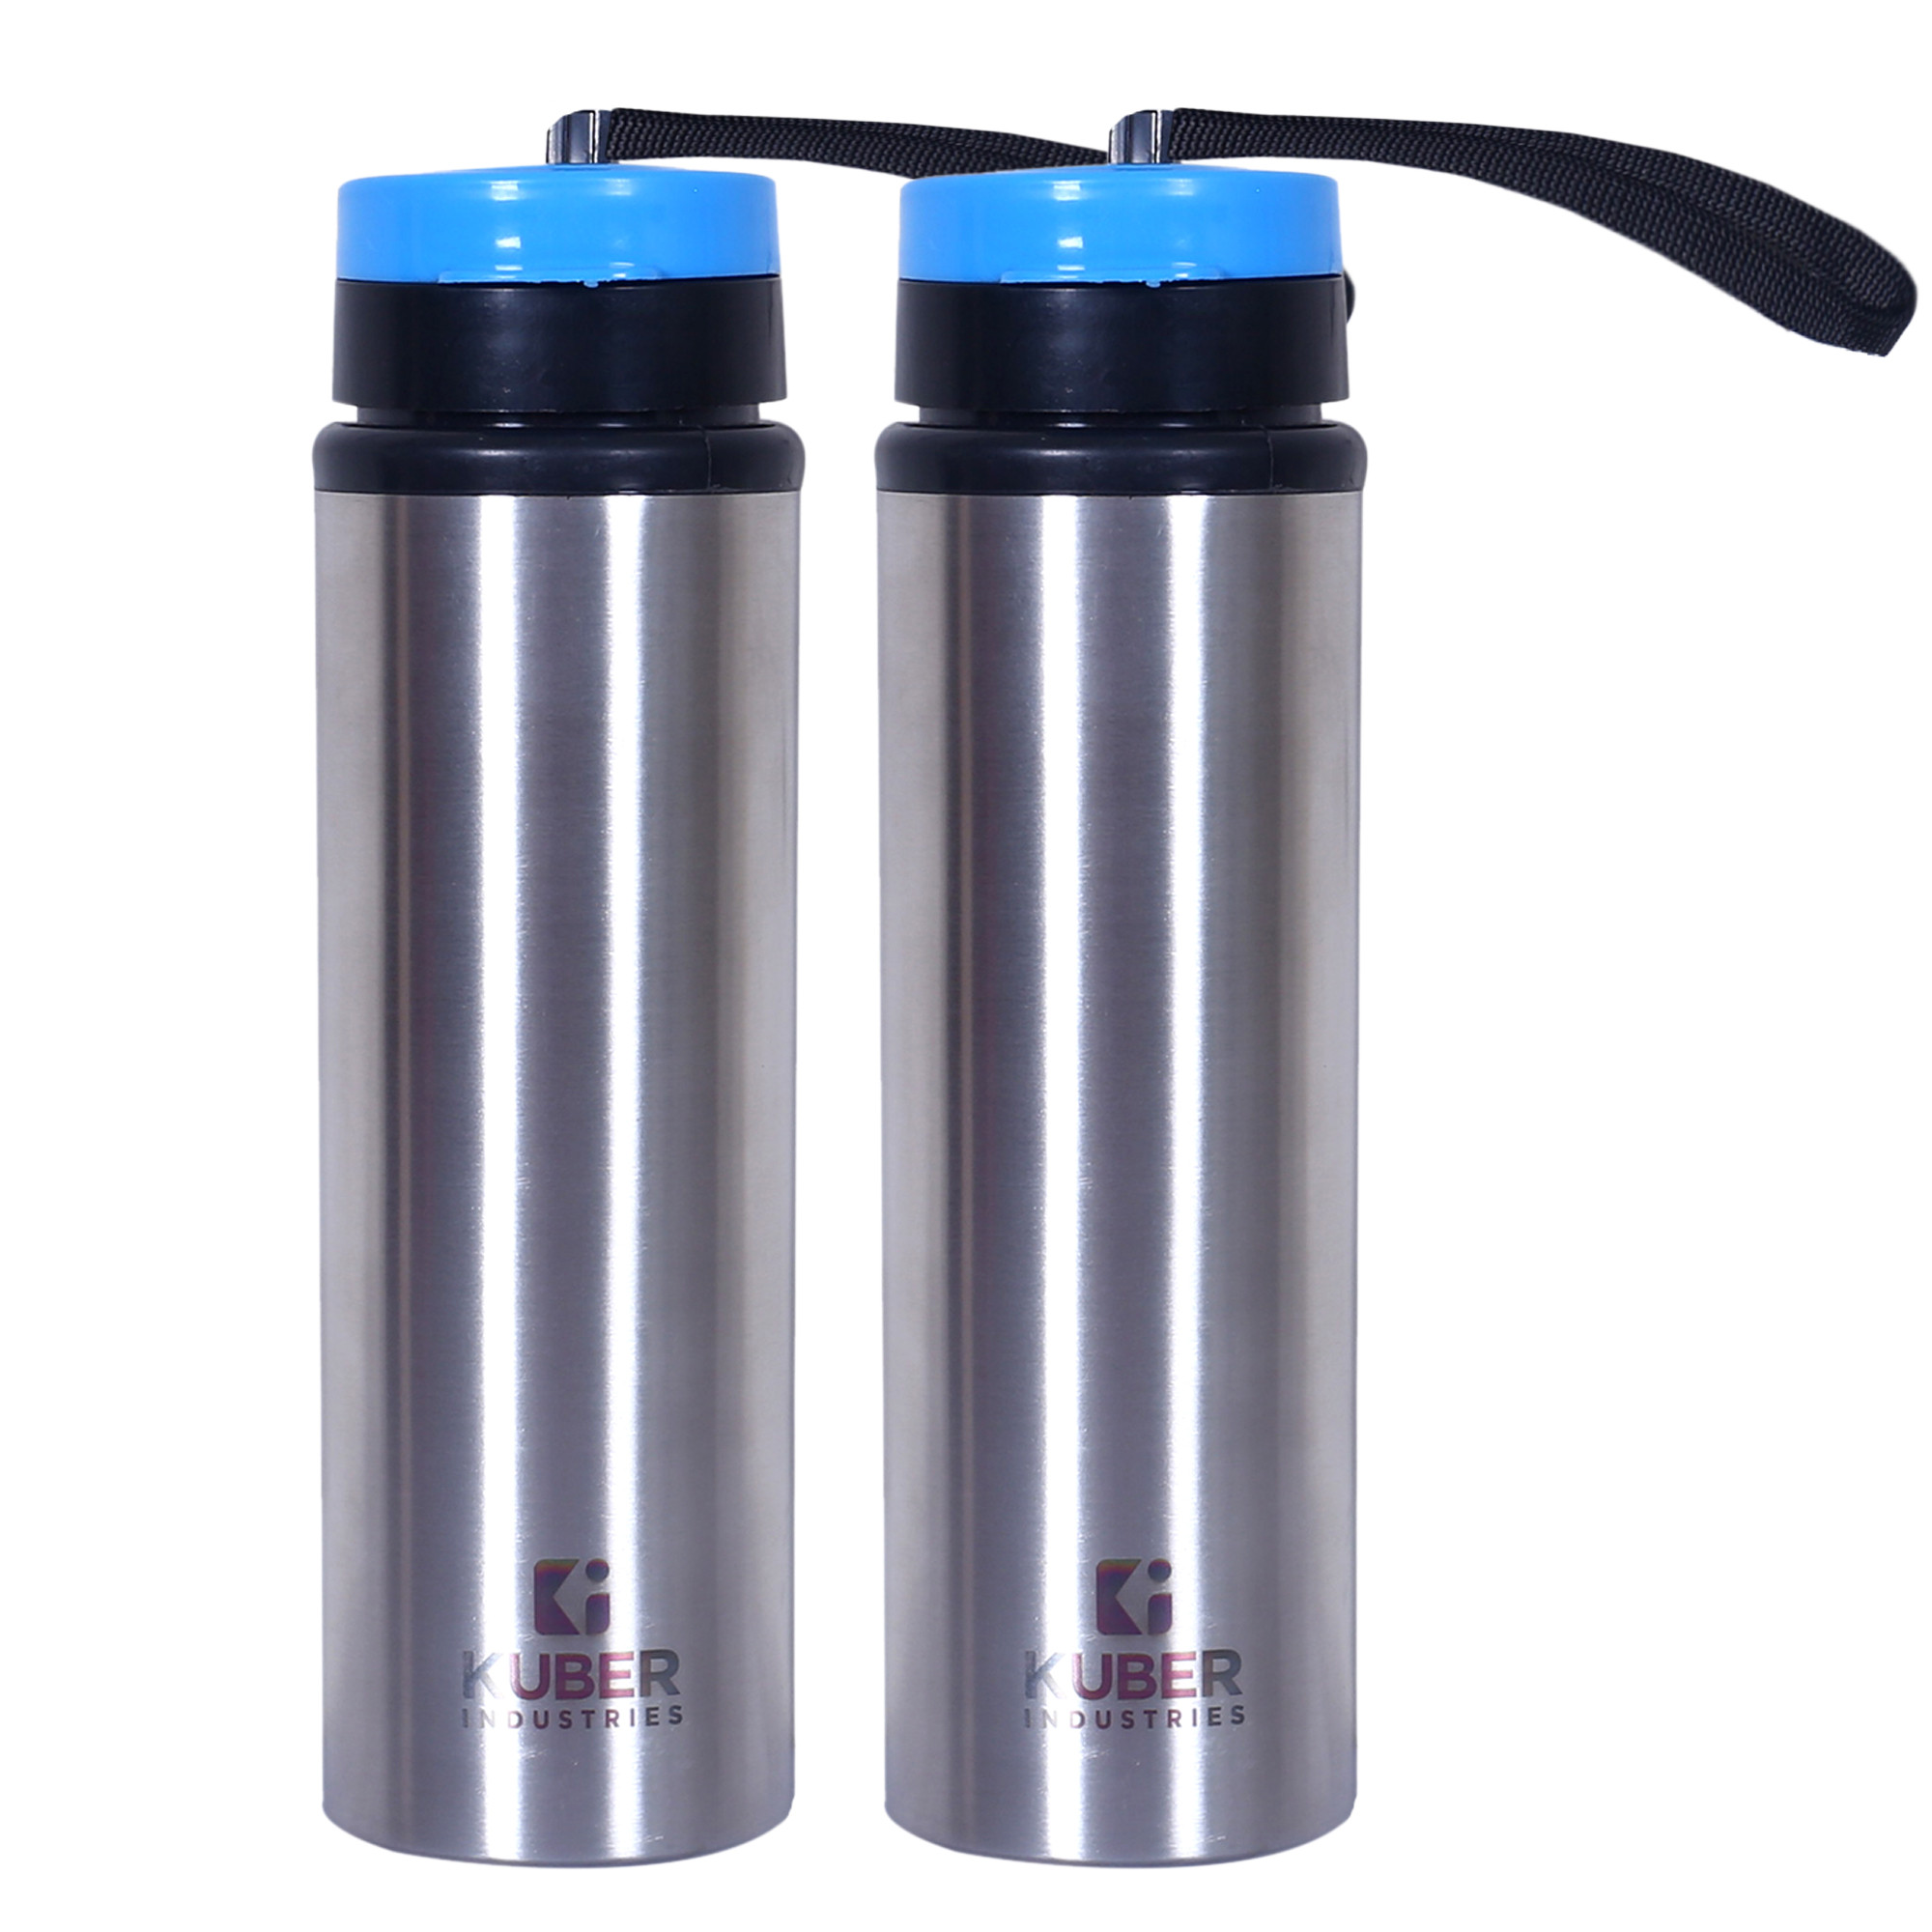 Kuber Industries Stainless Steel Water Bottle |Refrigerator Bottle For School Kids With Sipper Cap & Handle 750 ML (Silver)